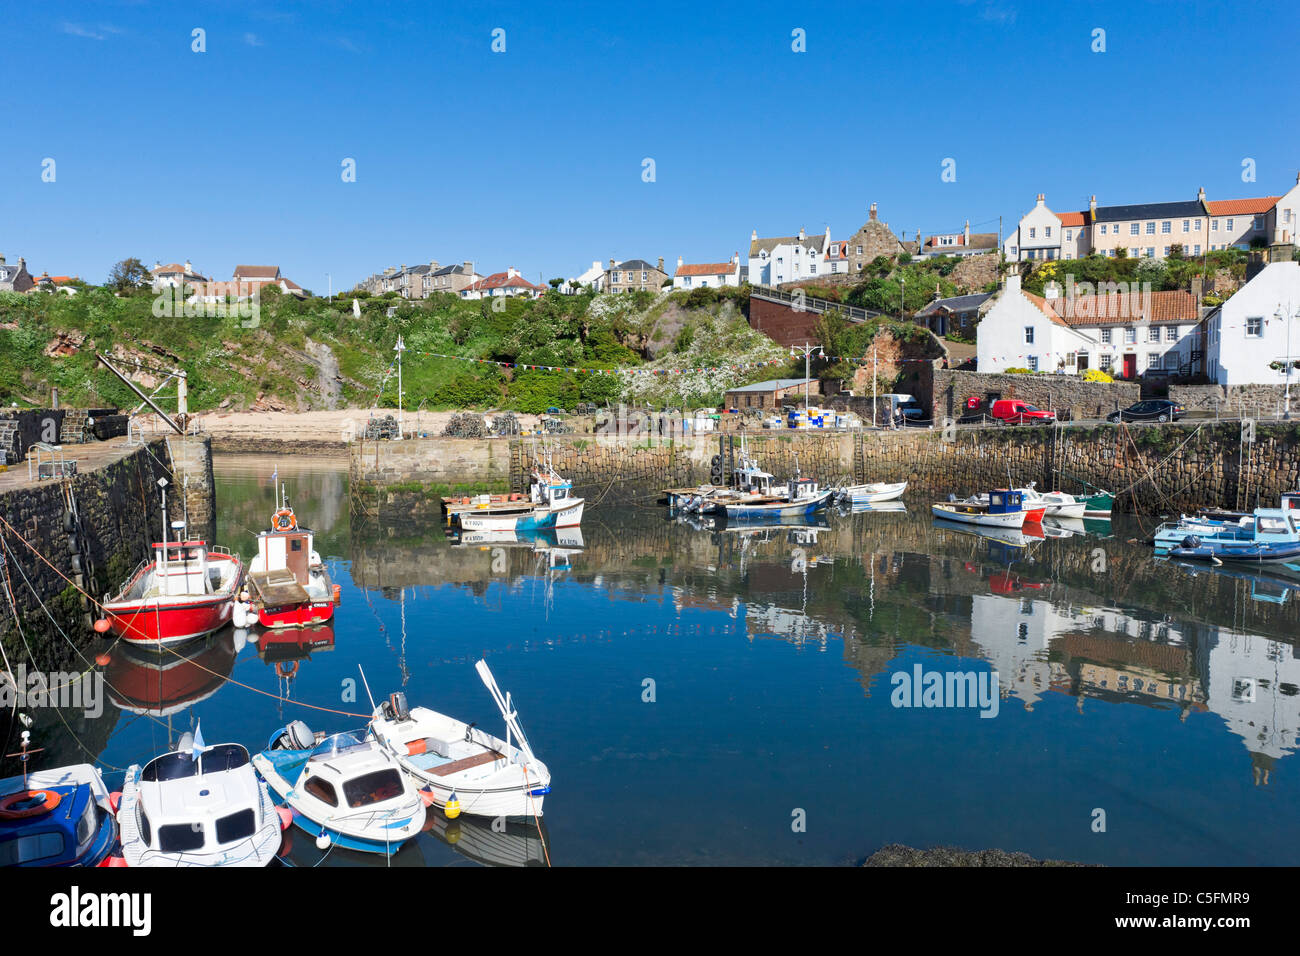 Local fishing boats in the harbour of the picturesque village of Crail, East Neuk, Fife, Scotland, UK Stock Photo